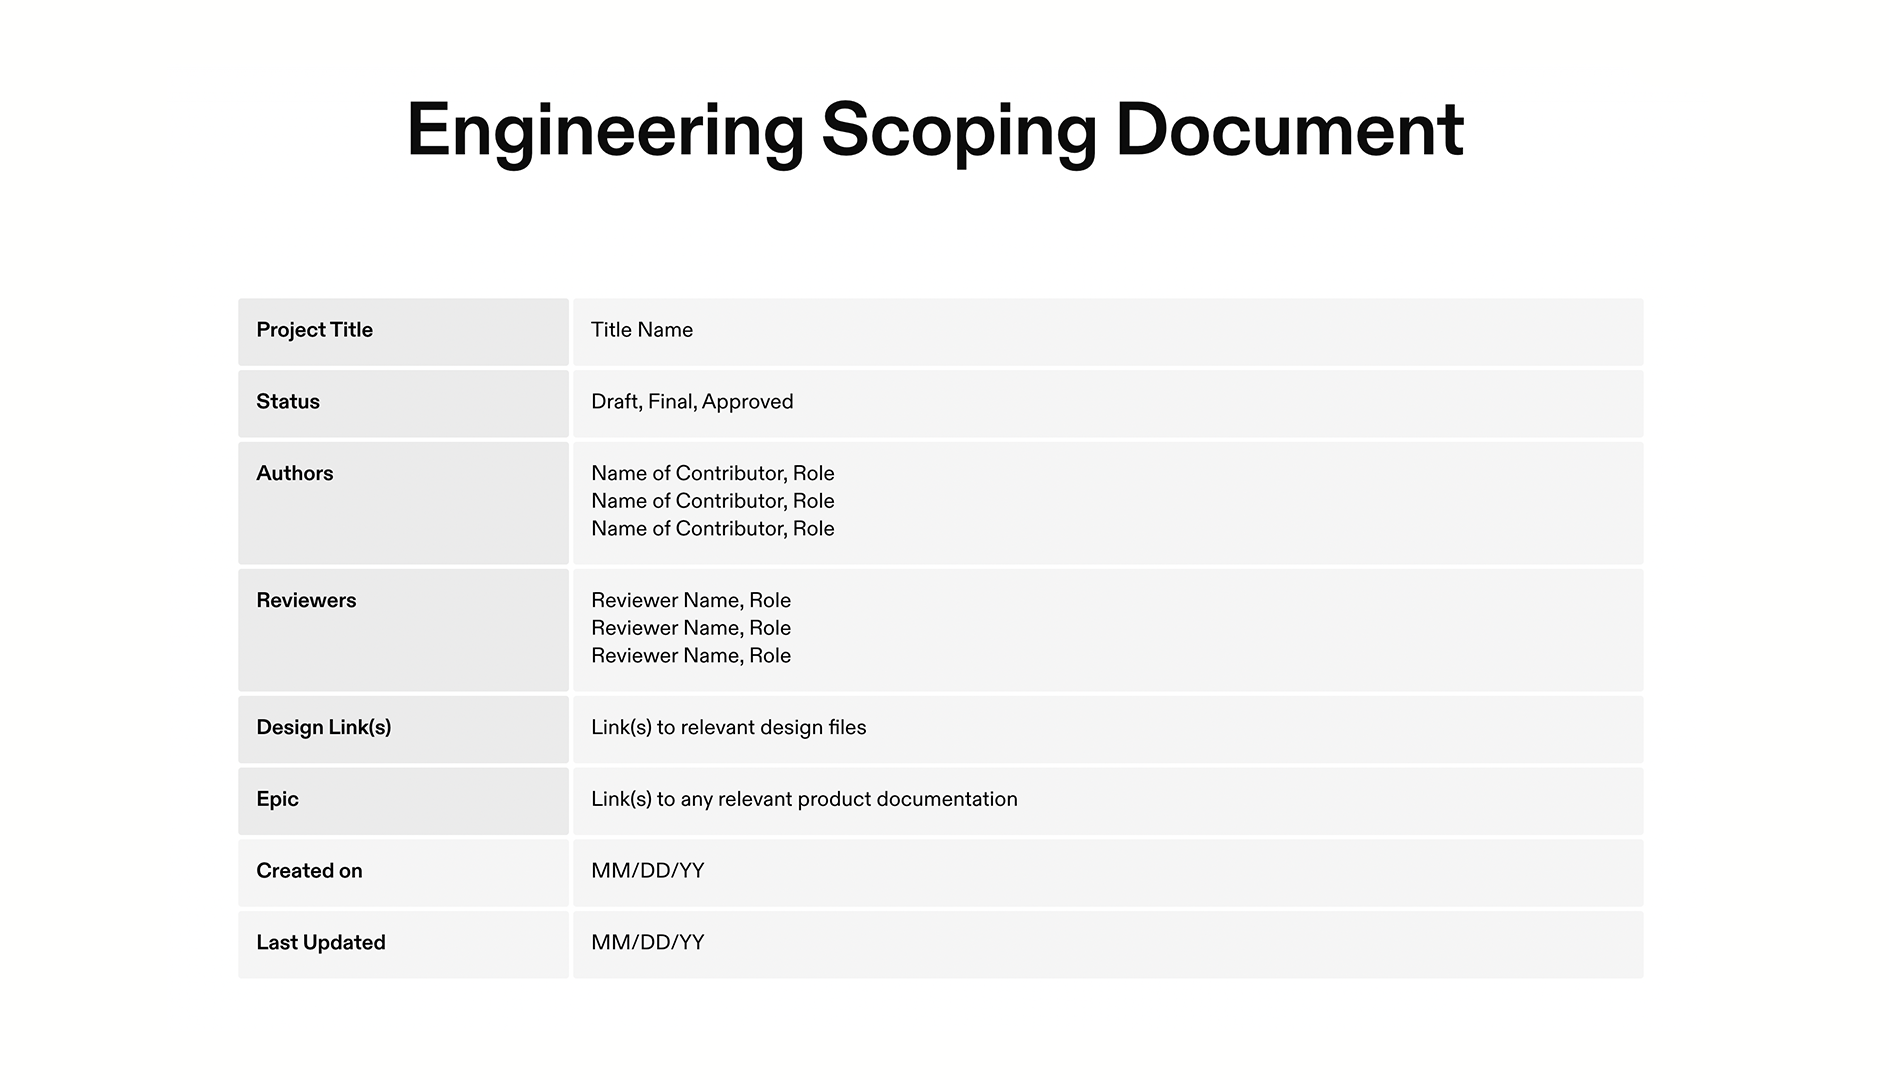 Engineering Scoping Document Template - Overview